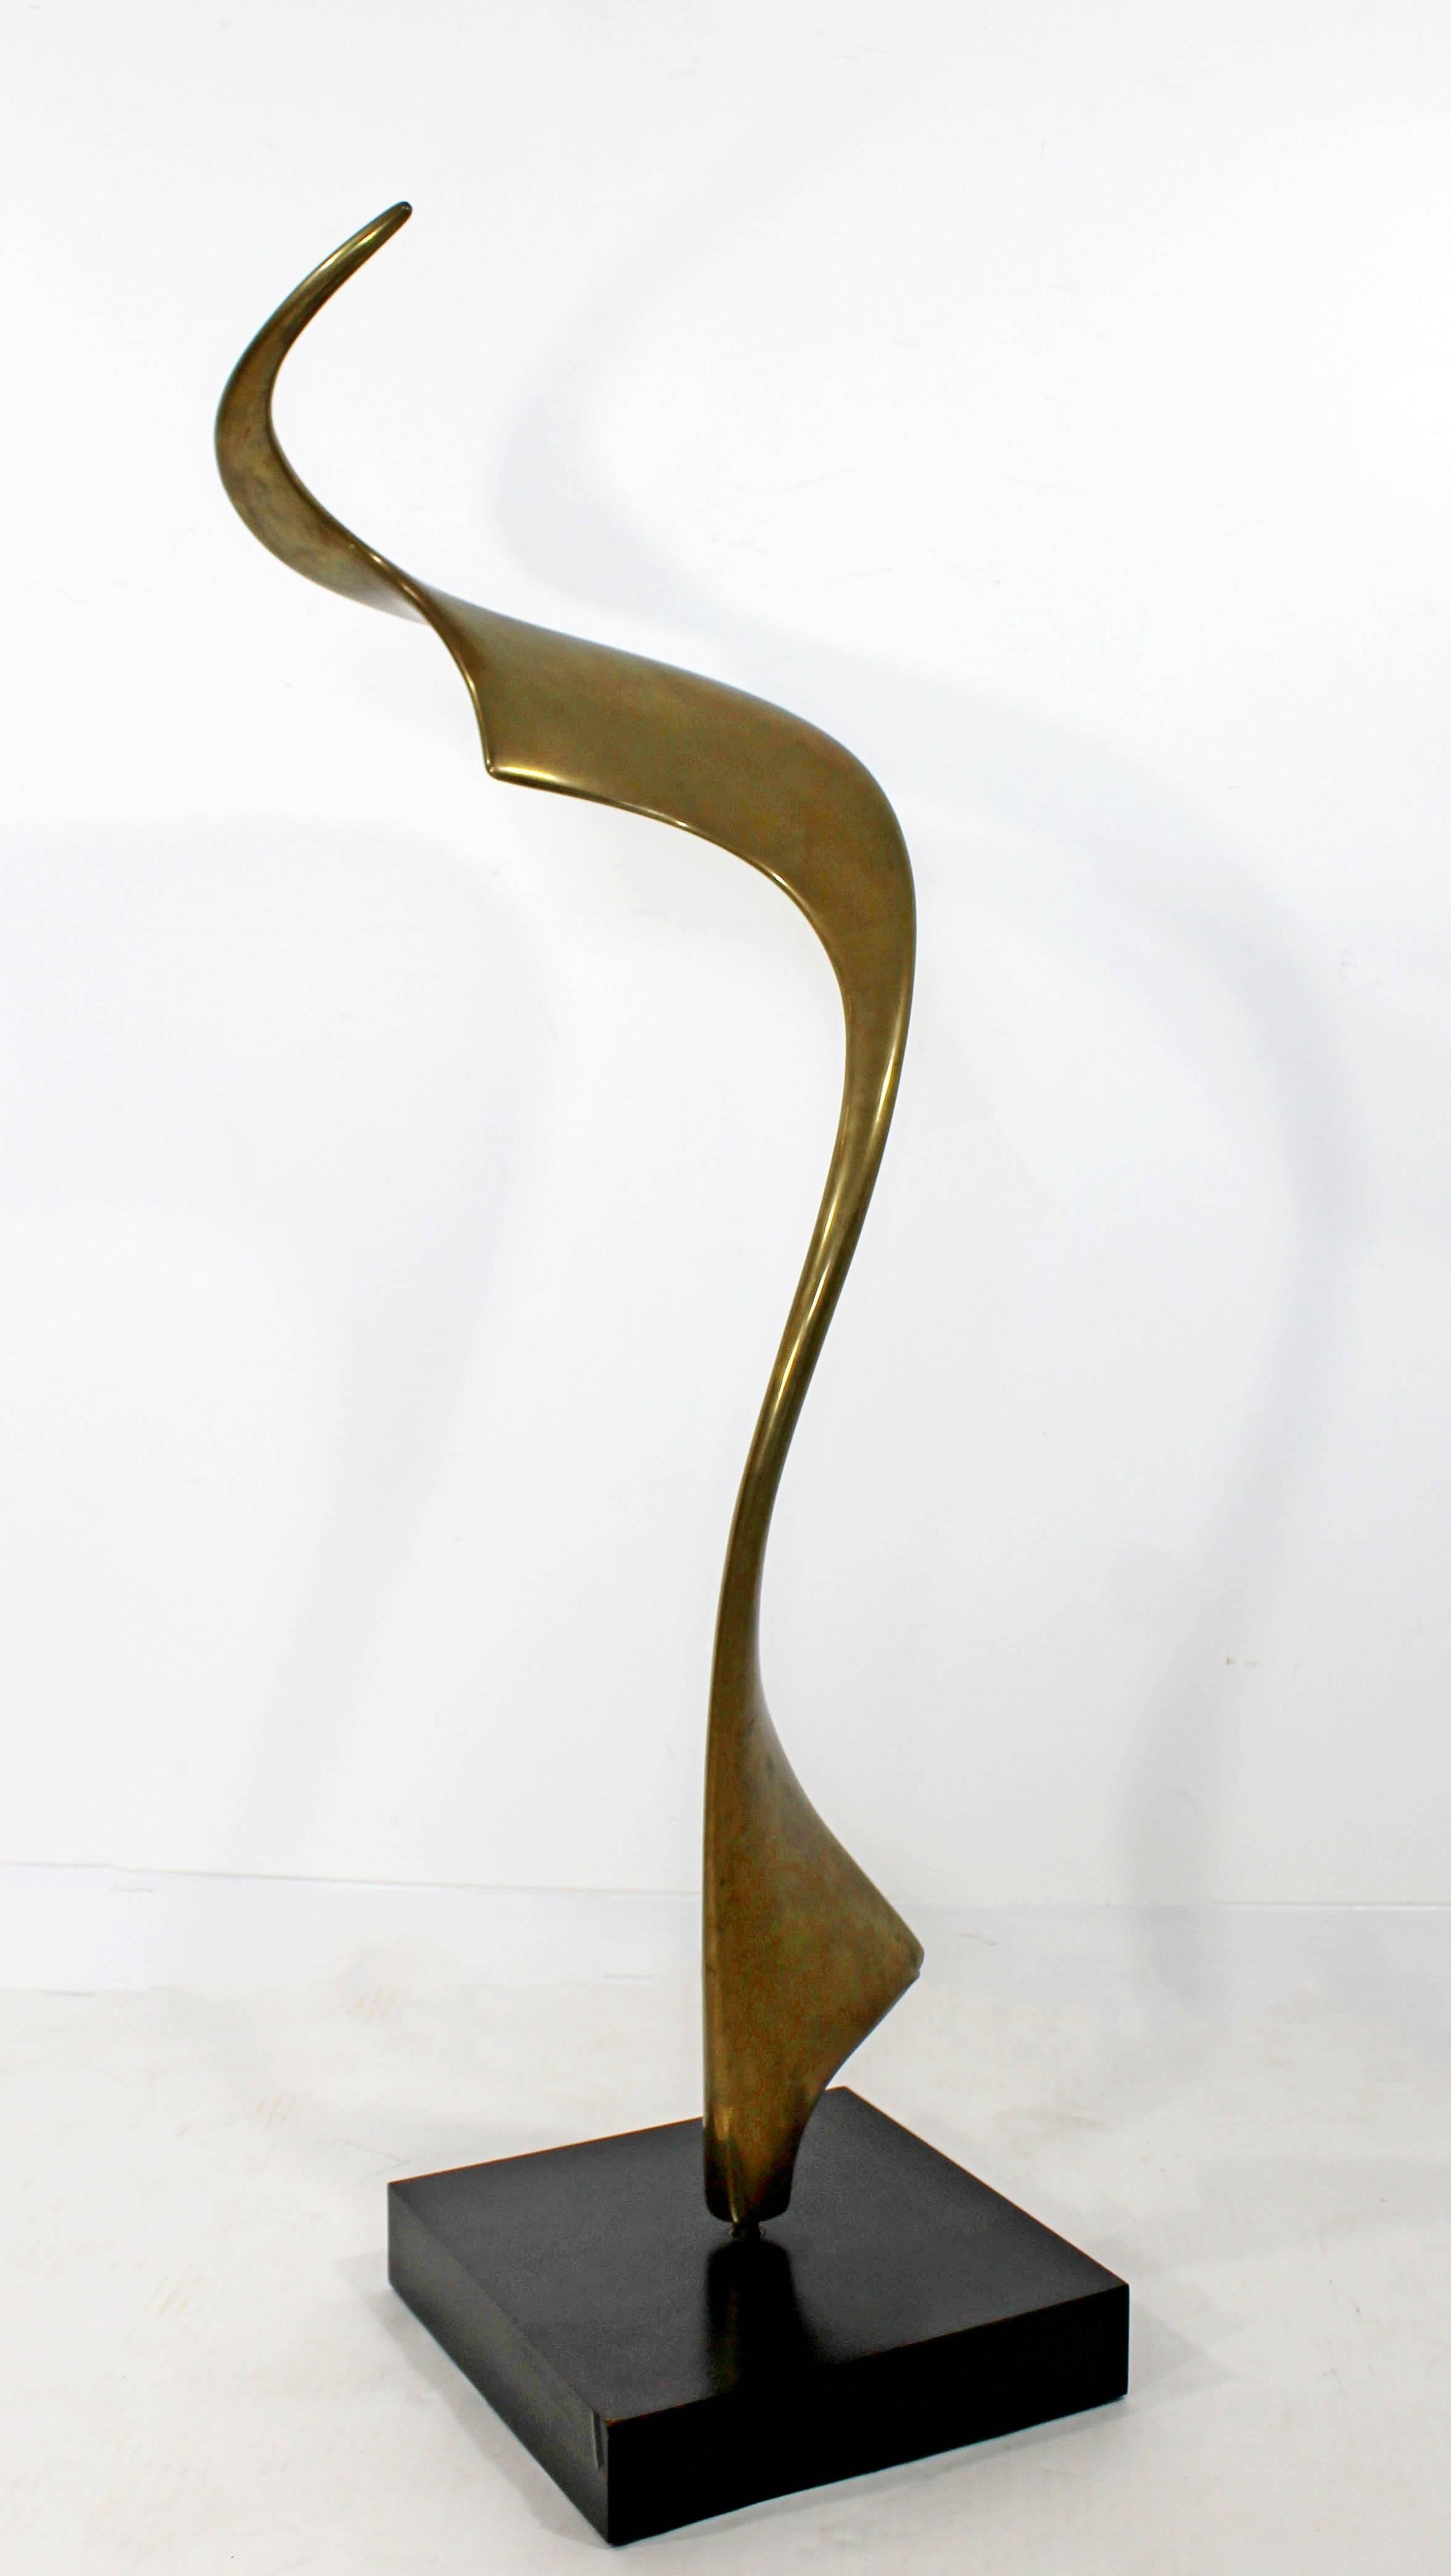 For your consideration is a lovely, abstract, bronze table sculpture. In excellent condition. The dimensions are 10